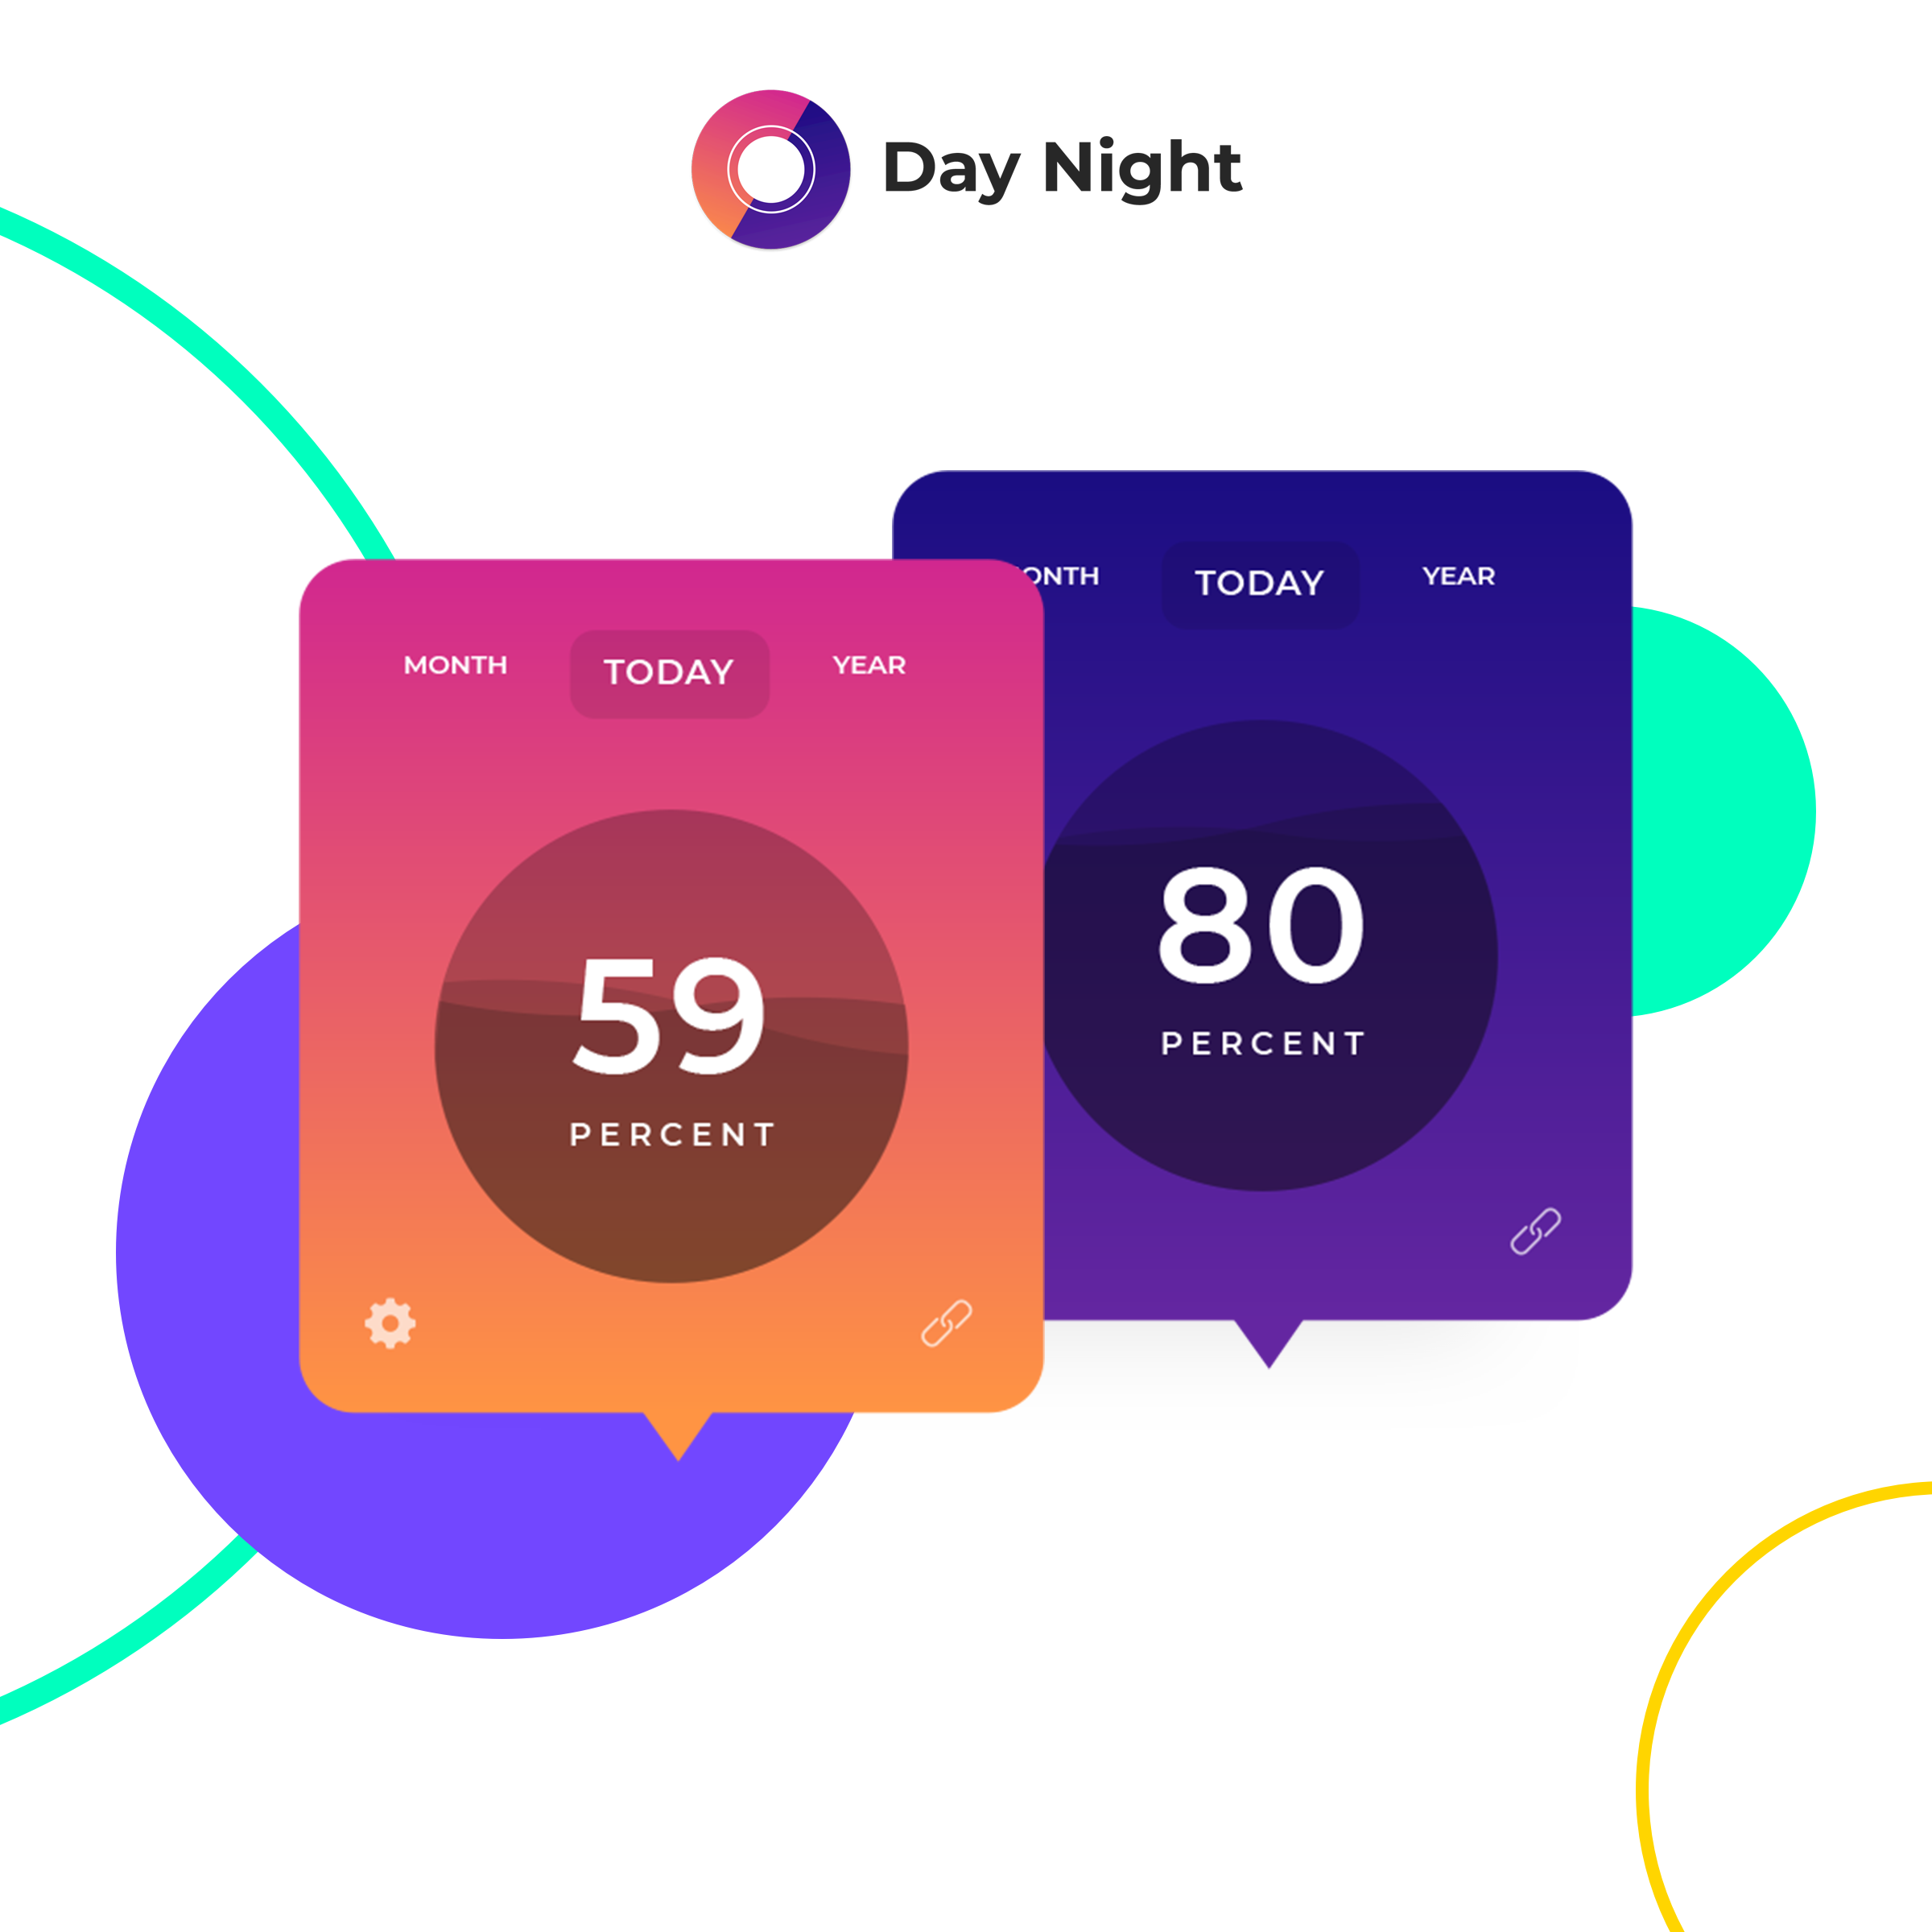 Day Night software